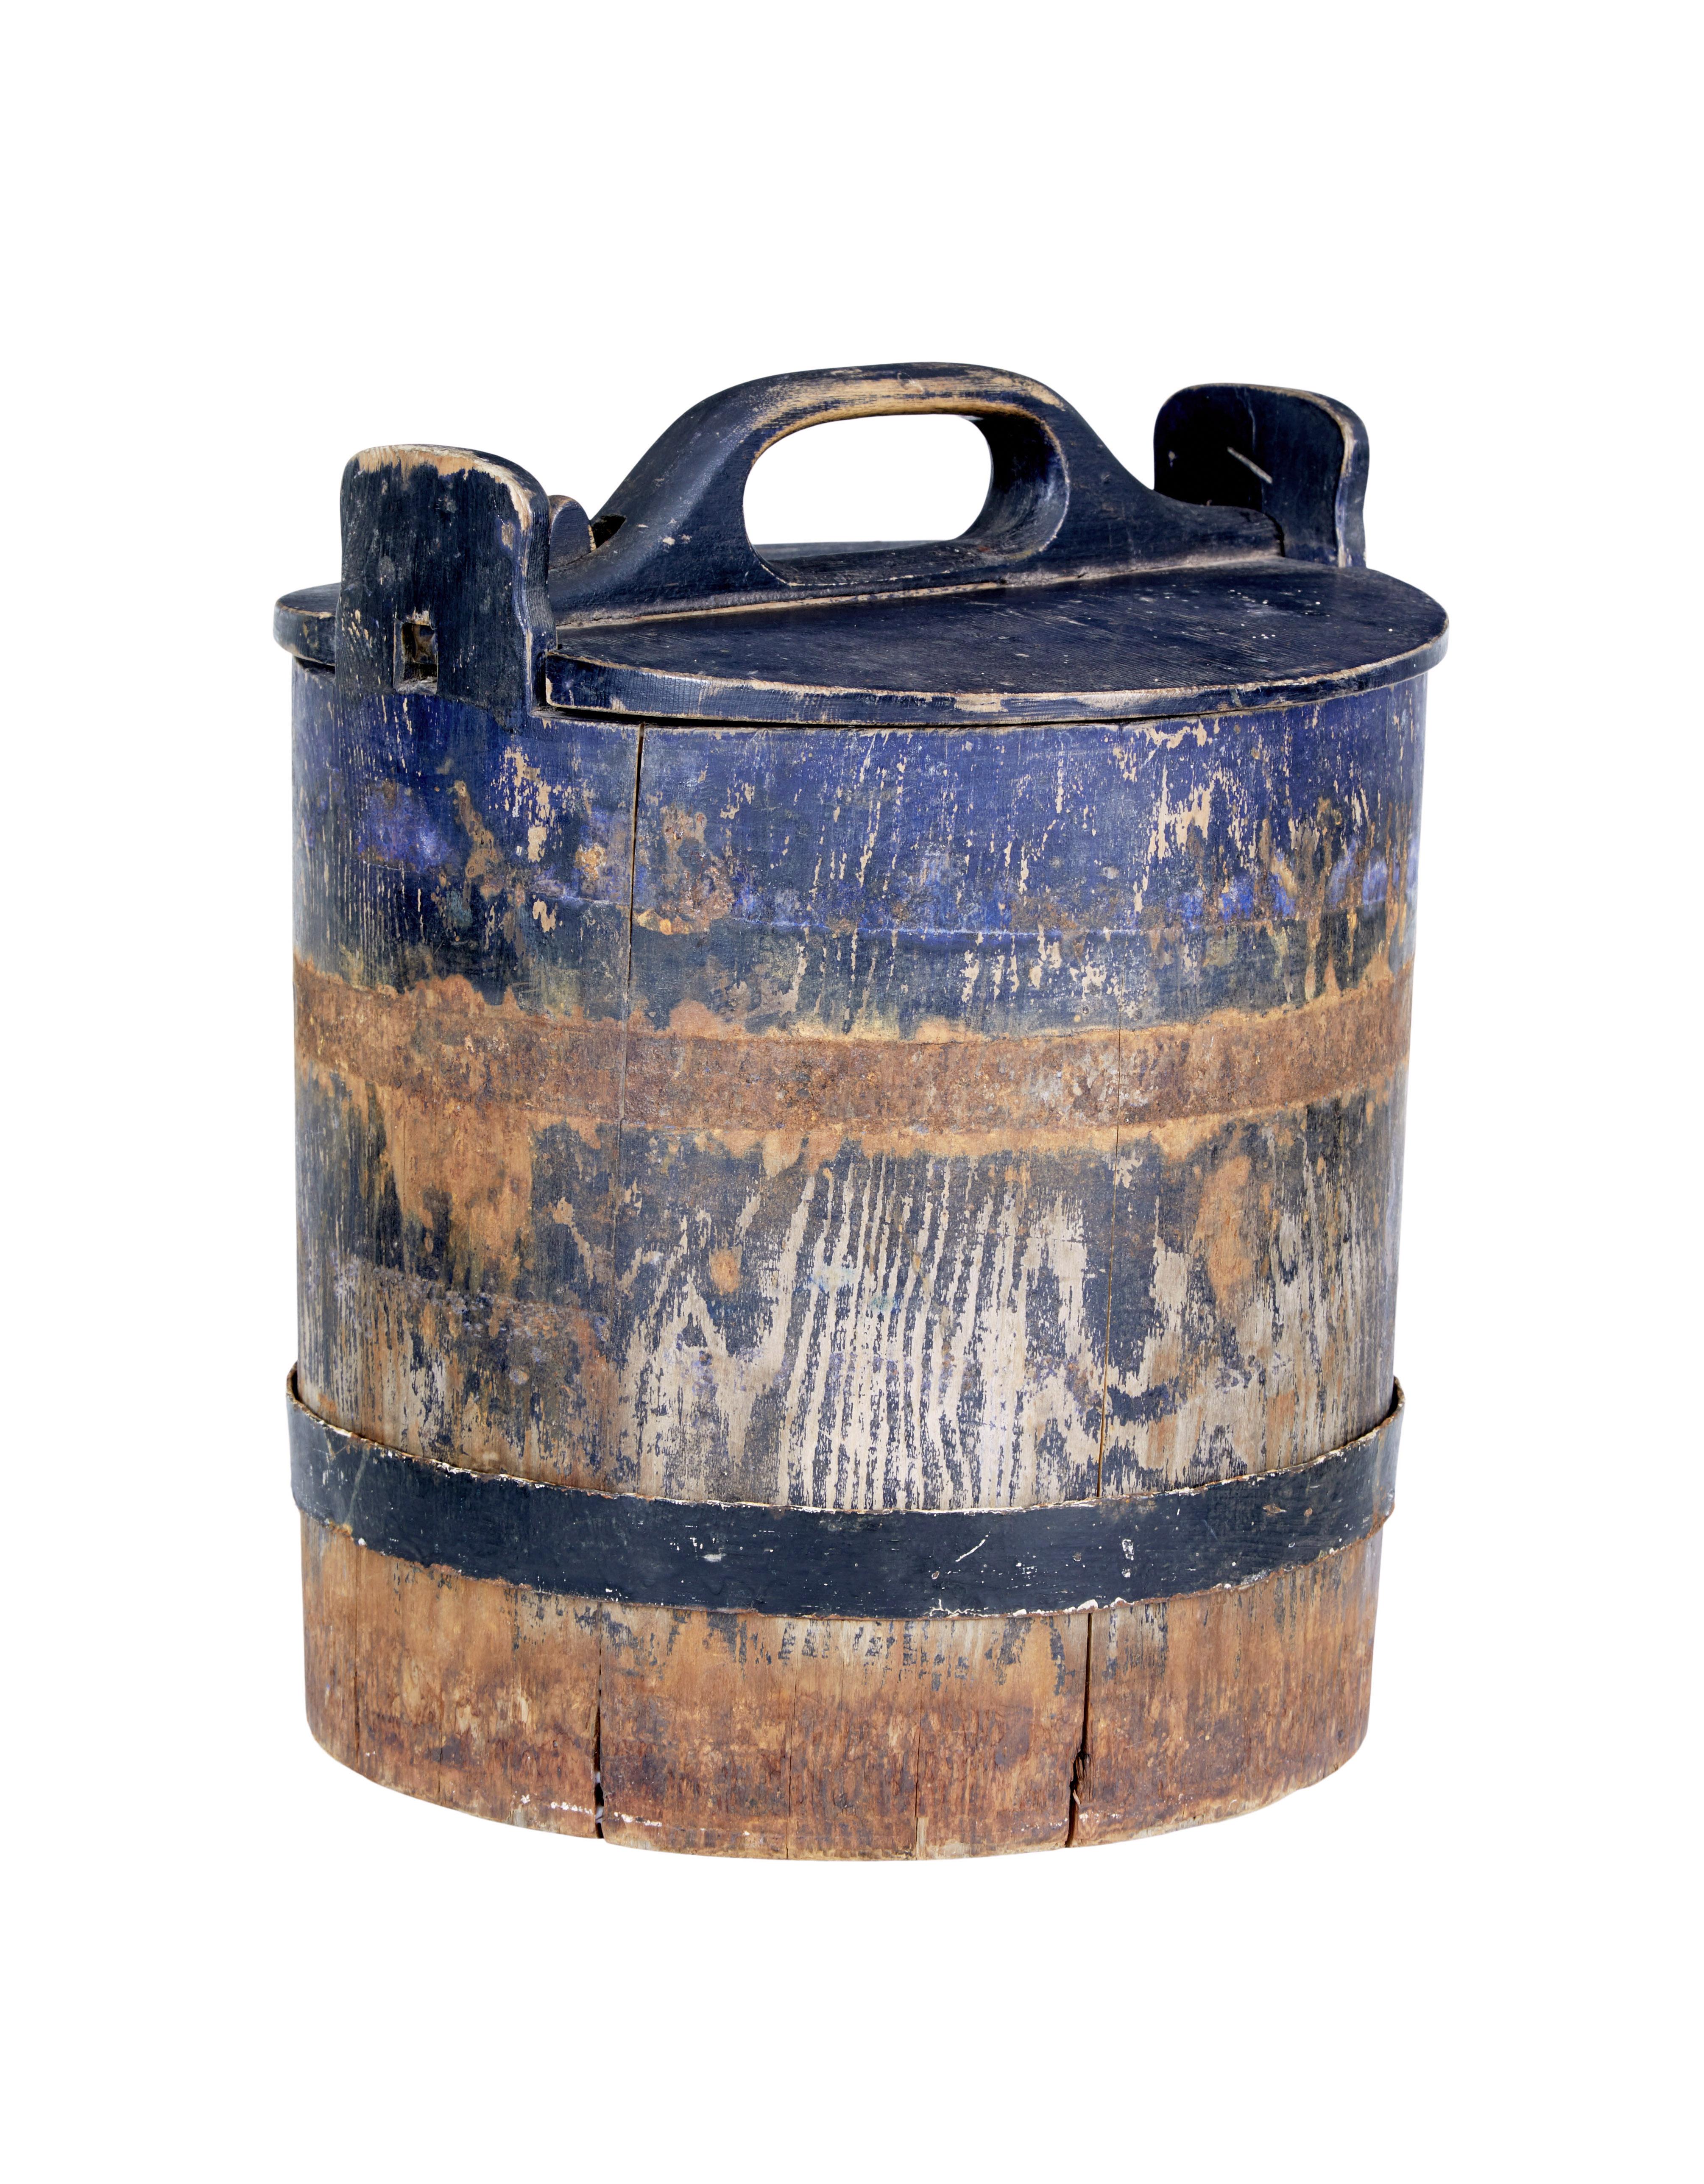 Mid-19th century rustic Swedish pine storage container circa 1860.

Very nice rare item to find intact. Made from pine with original bold blue paint, 1 original metal support hoop the other is no longer present. Lid still present and